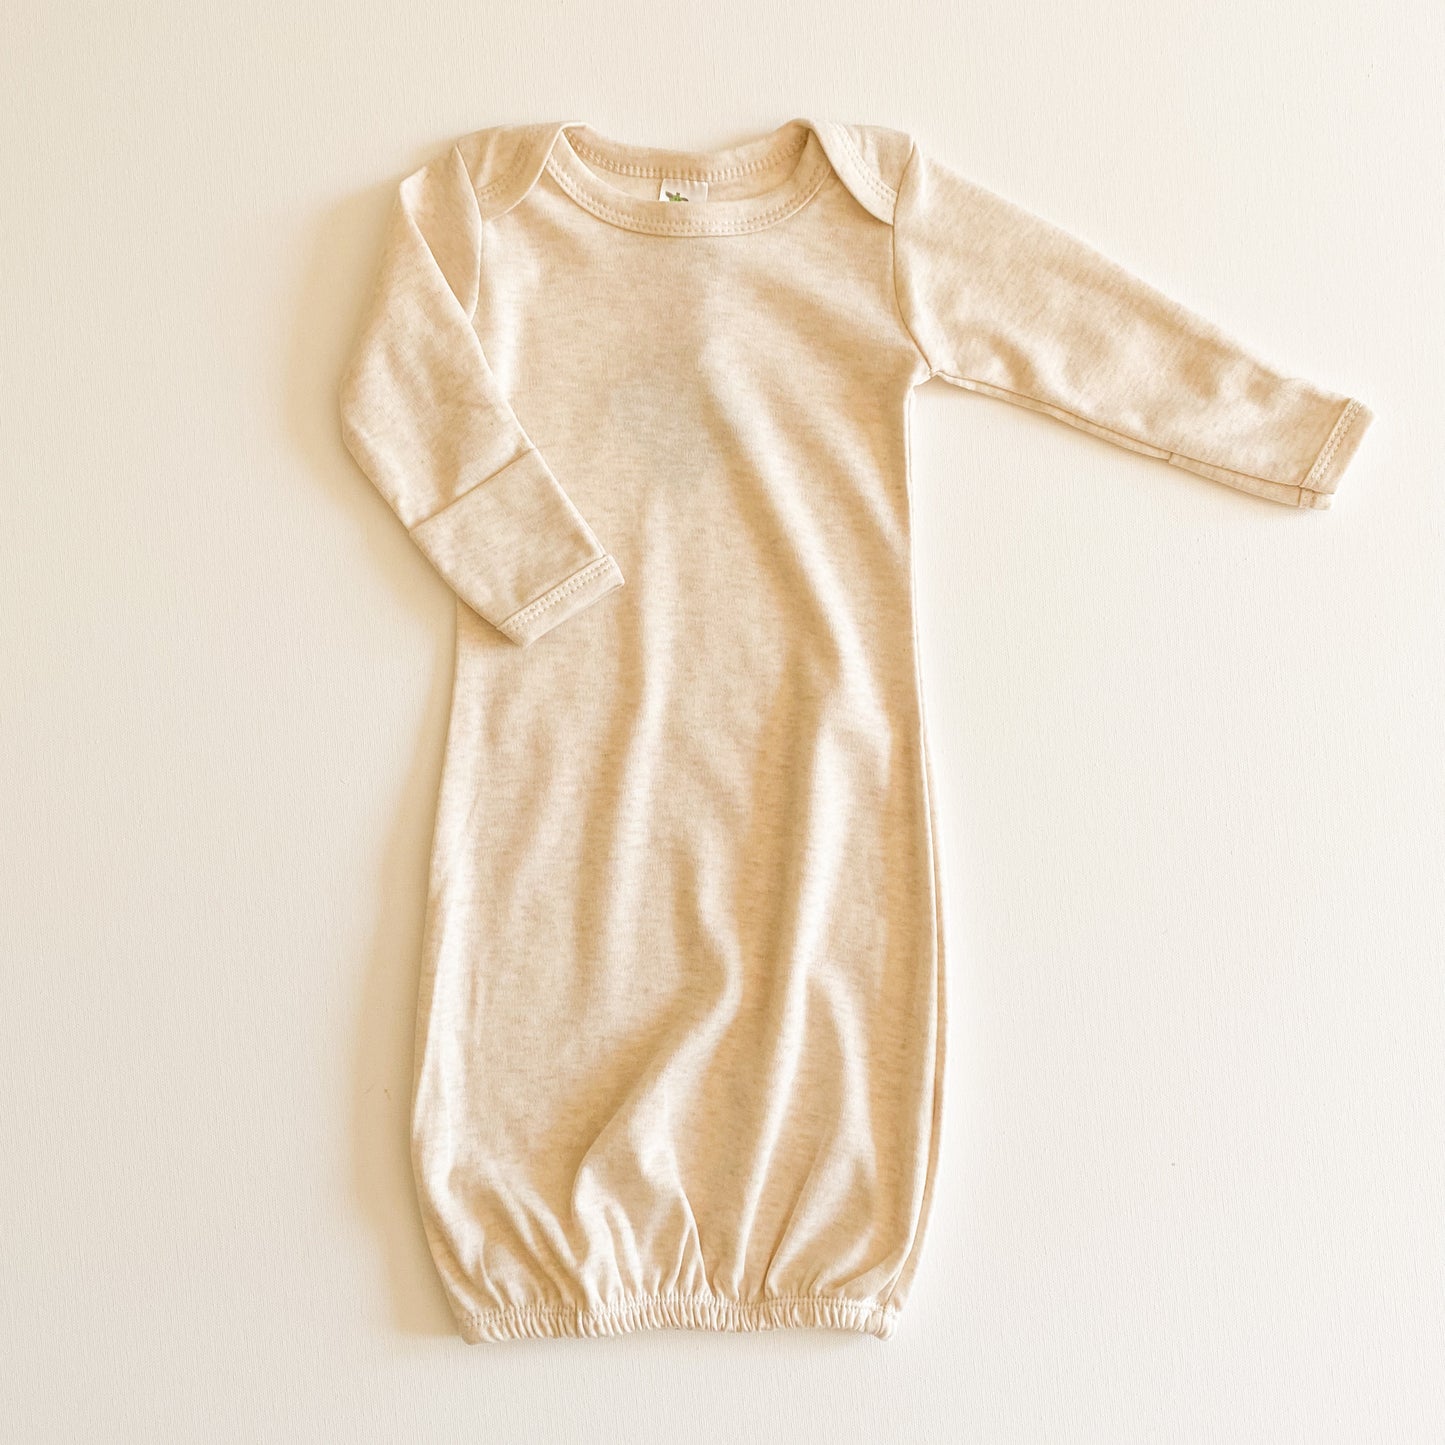 Oatmeal Baby Gown